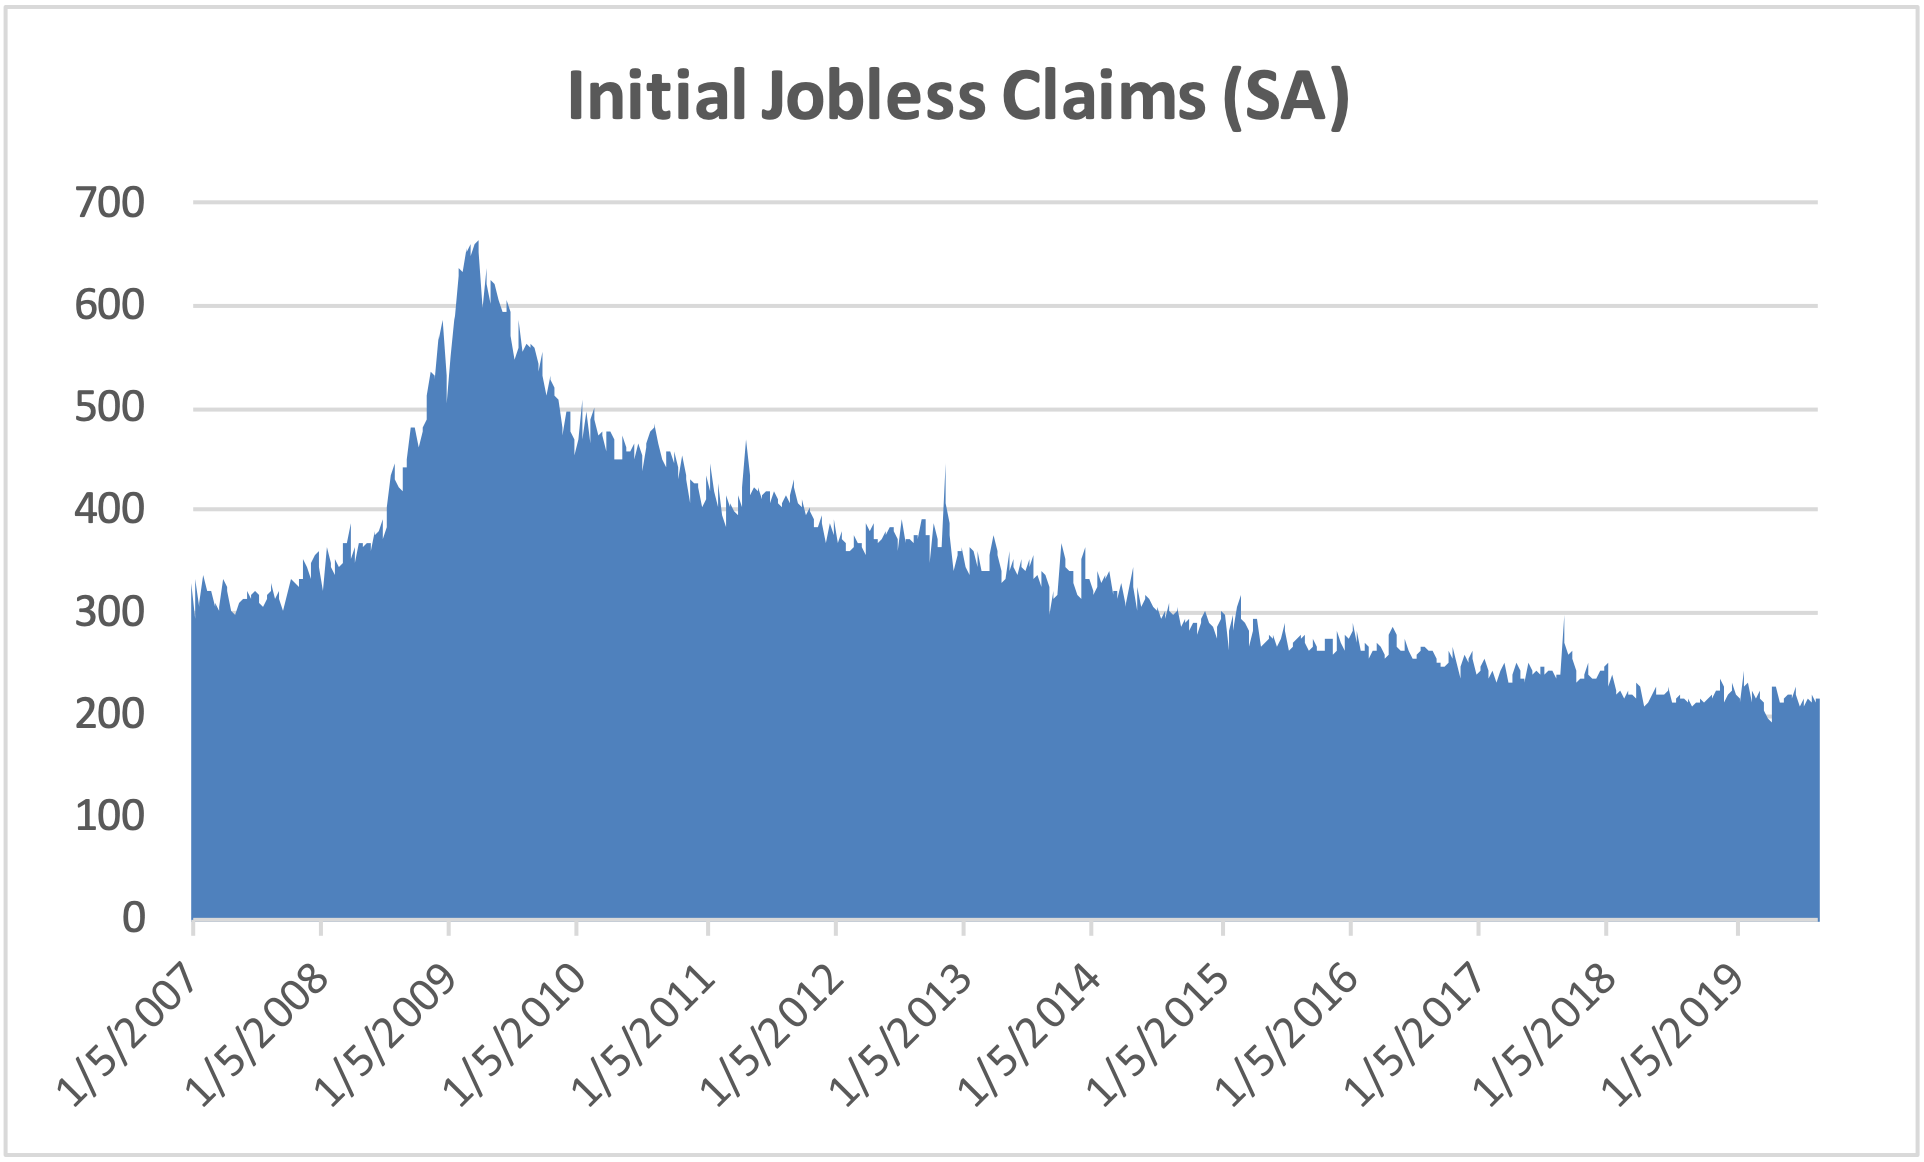 Initial Jobless Claims (SA)